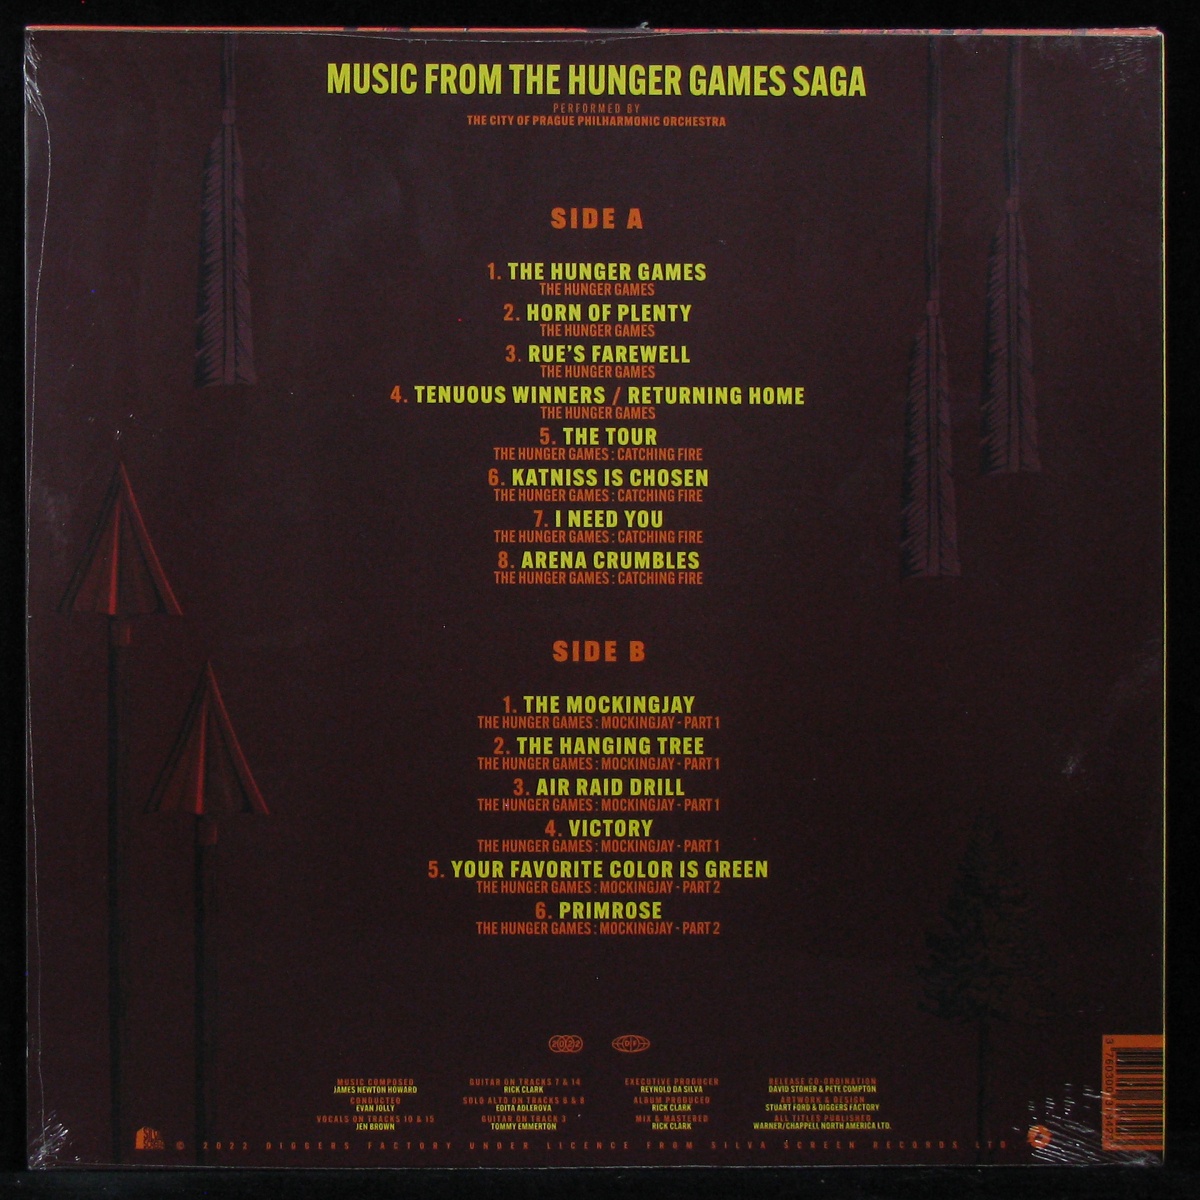 LP City Of Prague Philharmonic Orchestra — Music From The Hunger Games Saga фото 2